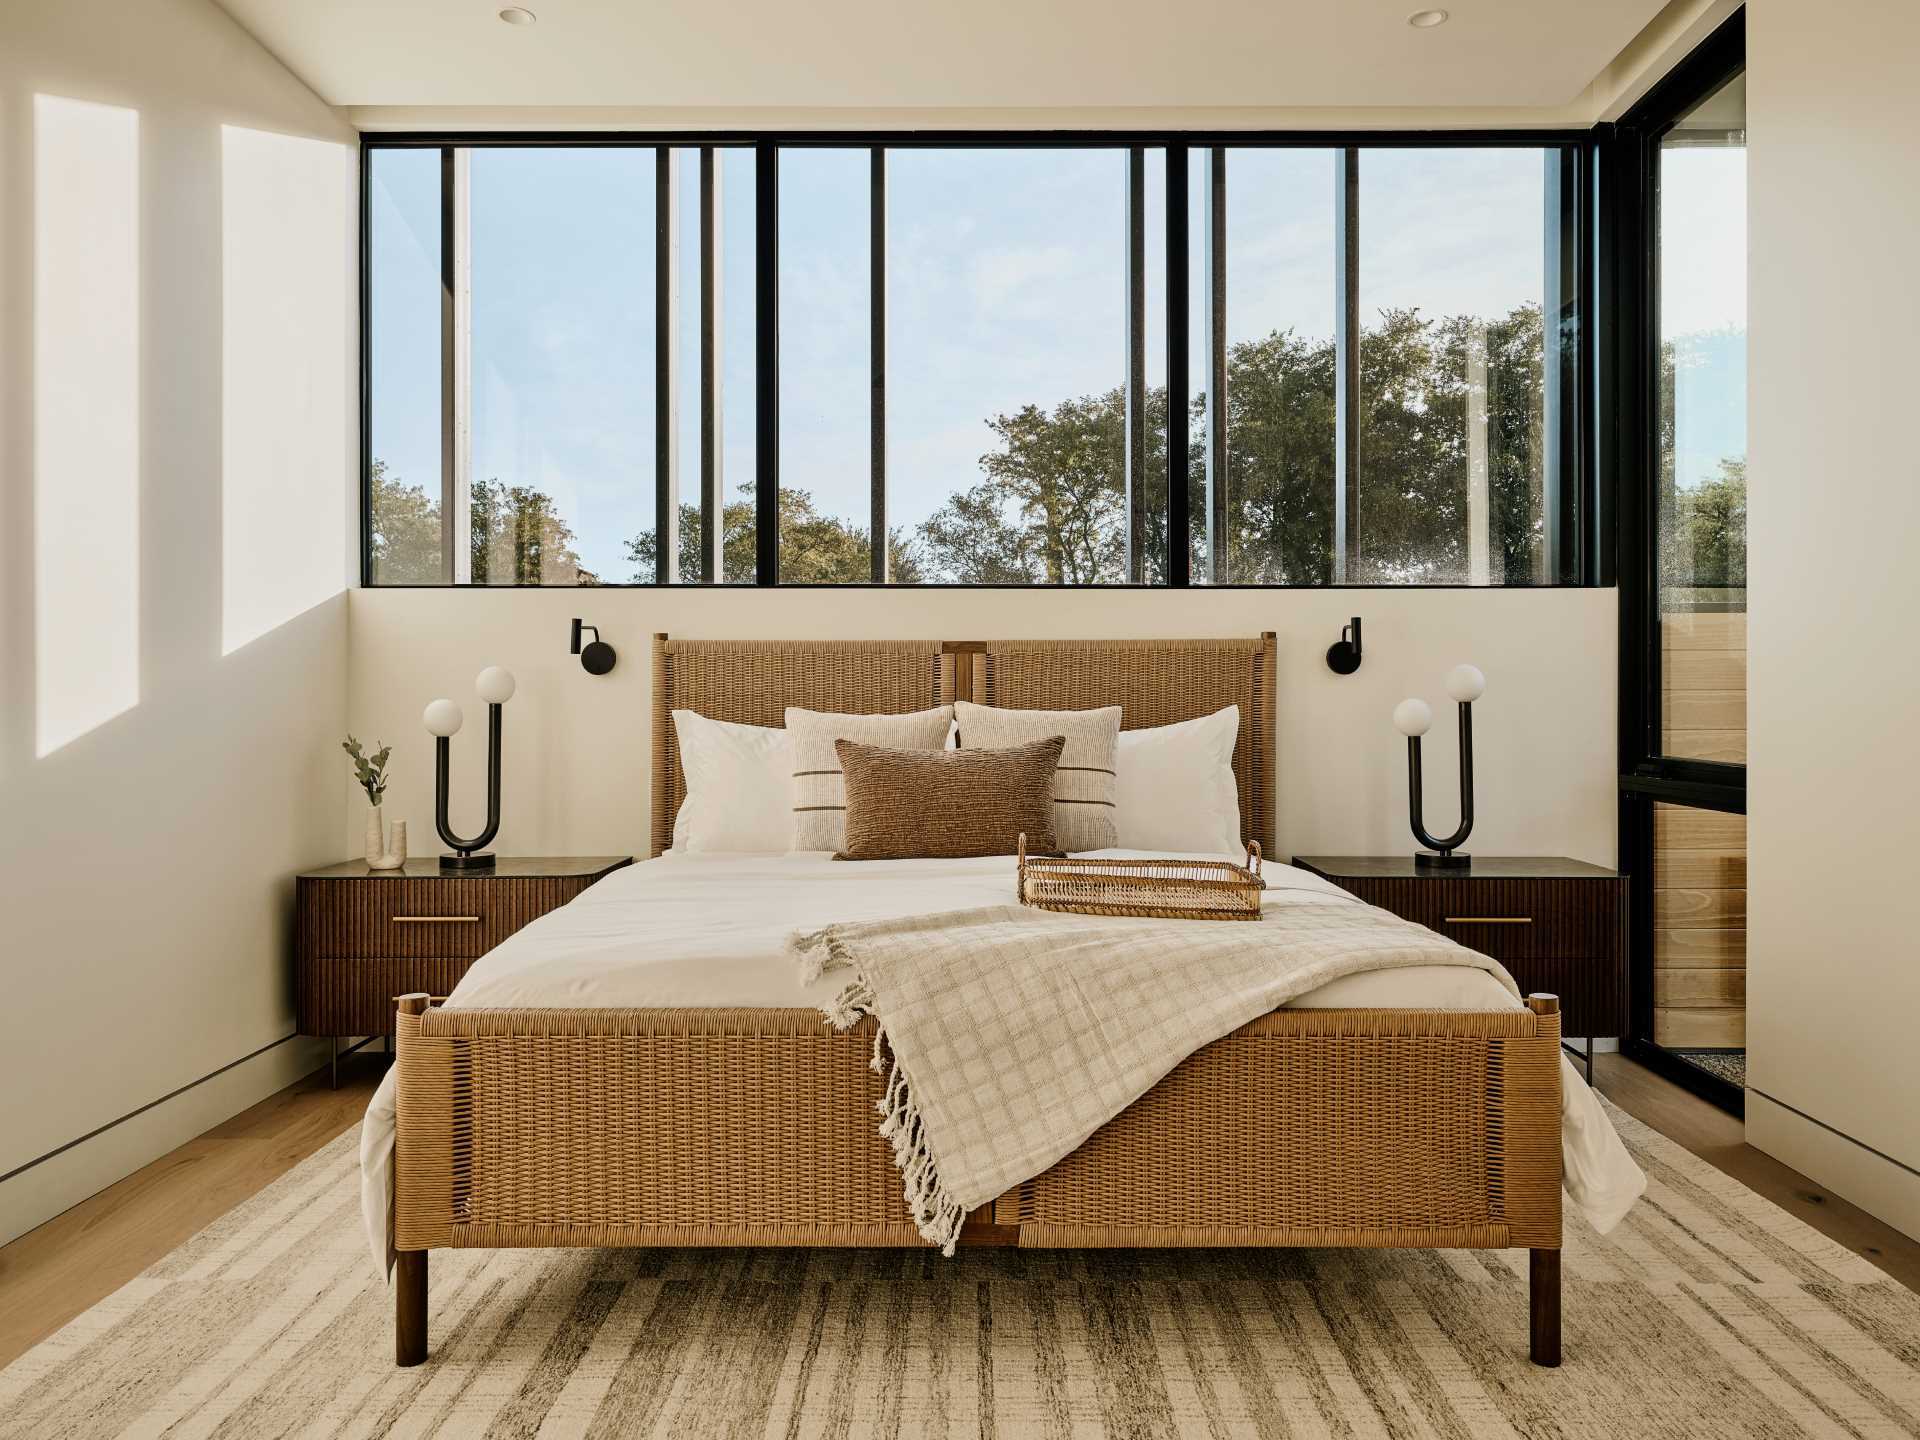 In the bedroom, textured elements add interest to the contemporary furniture.